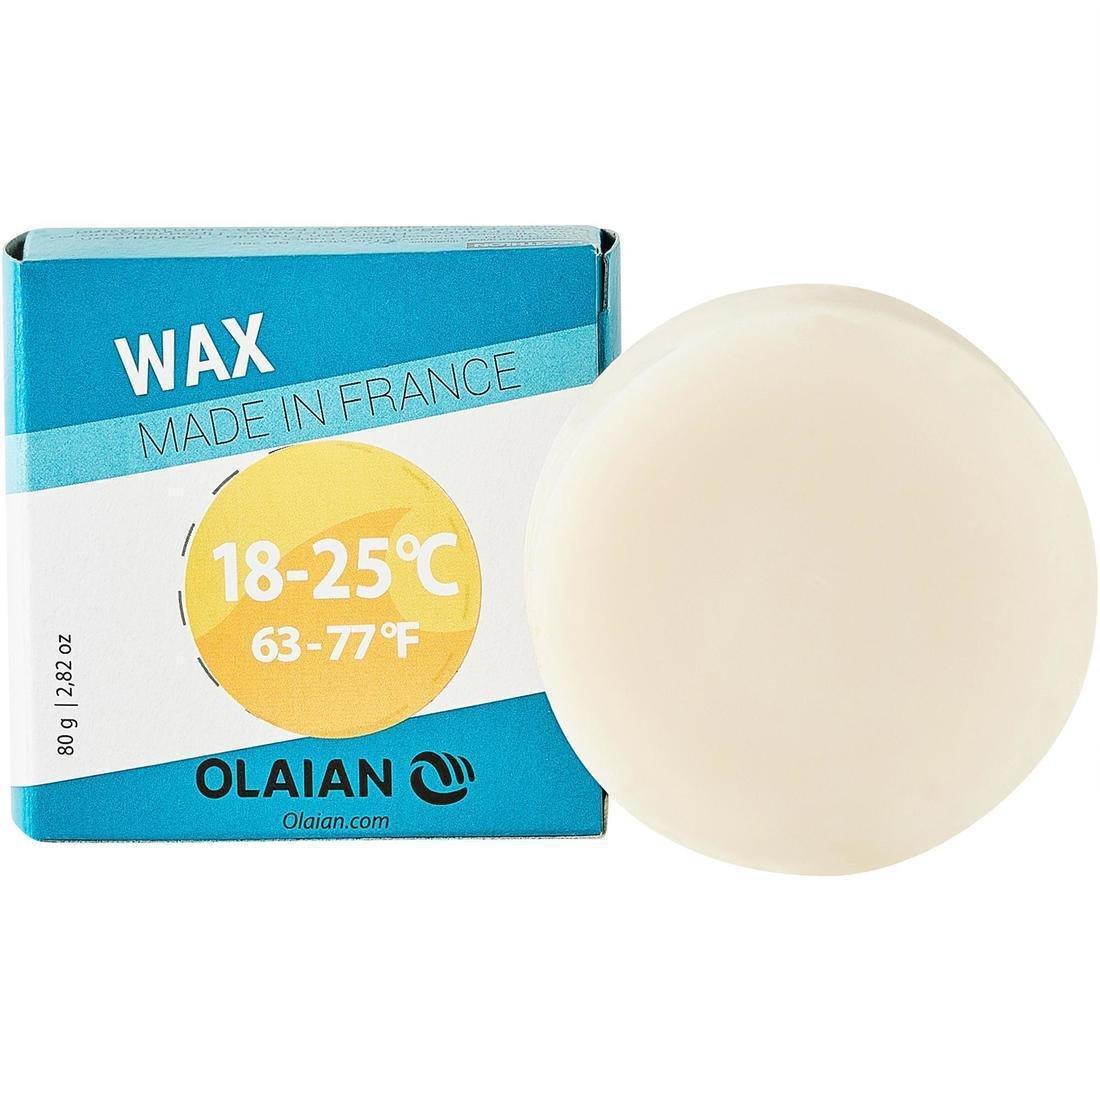 OLAIAN - Temperate Water Surf Wax 18-25C, Beige